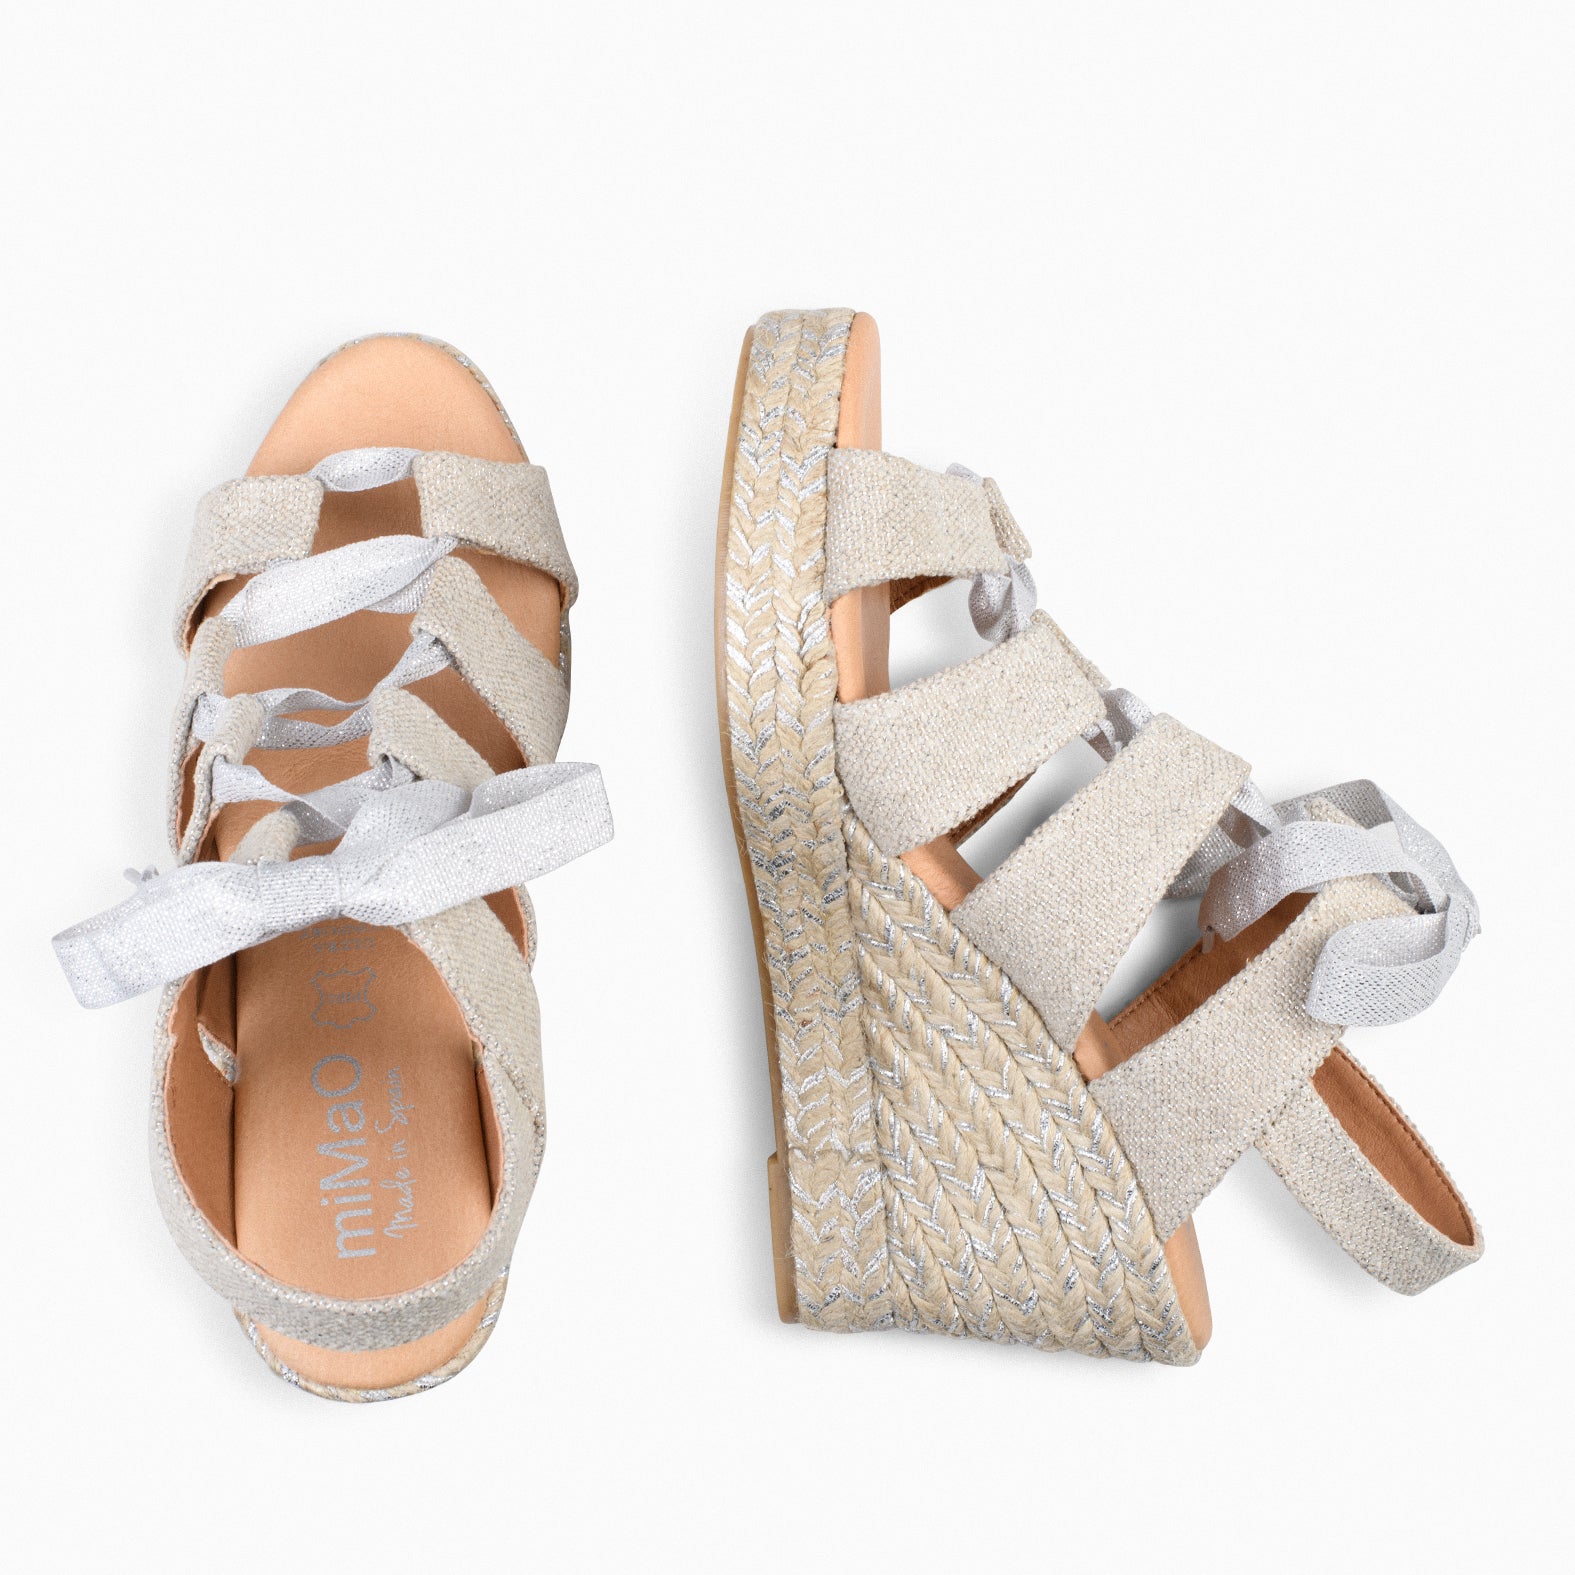 ROMAN – SILVER wedge espadrilles with lurex laces